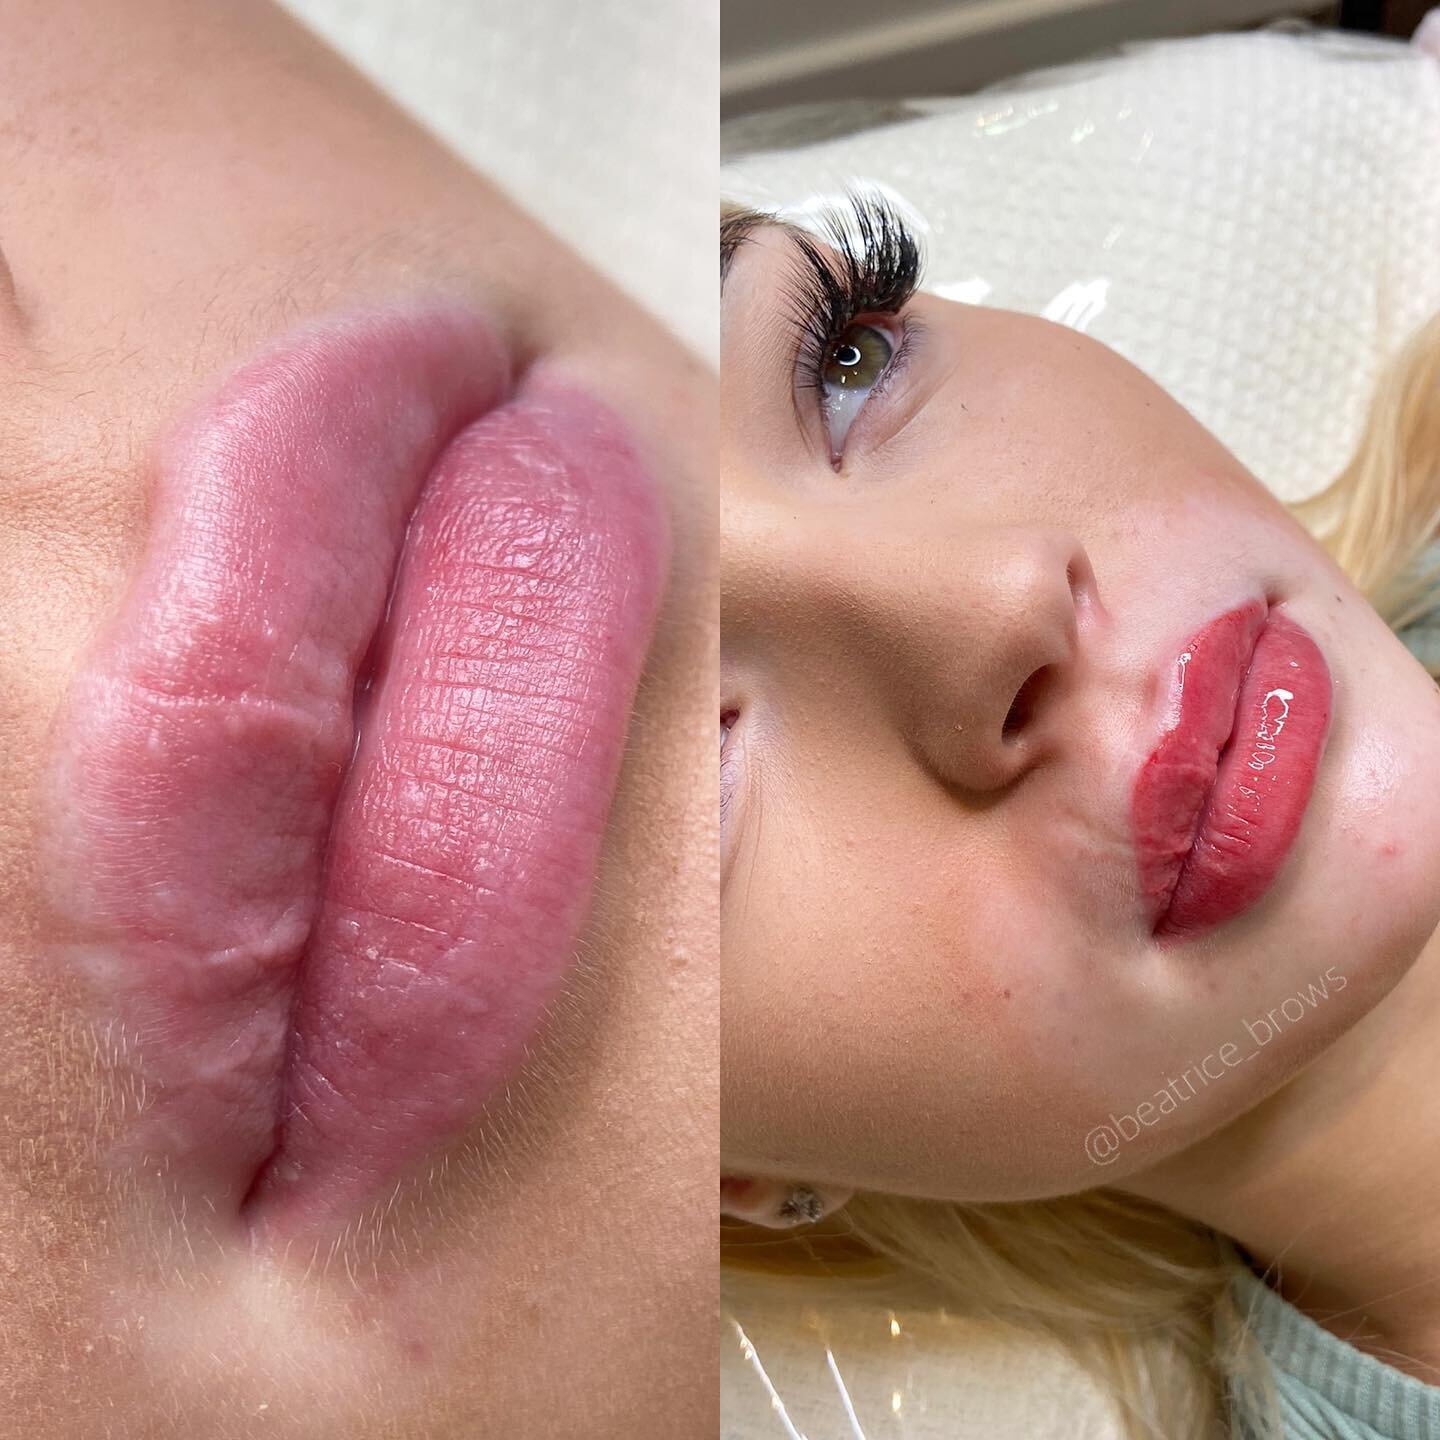 LIP BLUSH TATTOO 💓💋 we chose a peachy pink colour for this touch up session 🍑🍑 

Scar cover up to give some new definition + shape to these lips! HONESTLY SO DAMN HAPPY with what we managed to achieve in the session 👏🏽🙌🏽😇